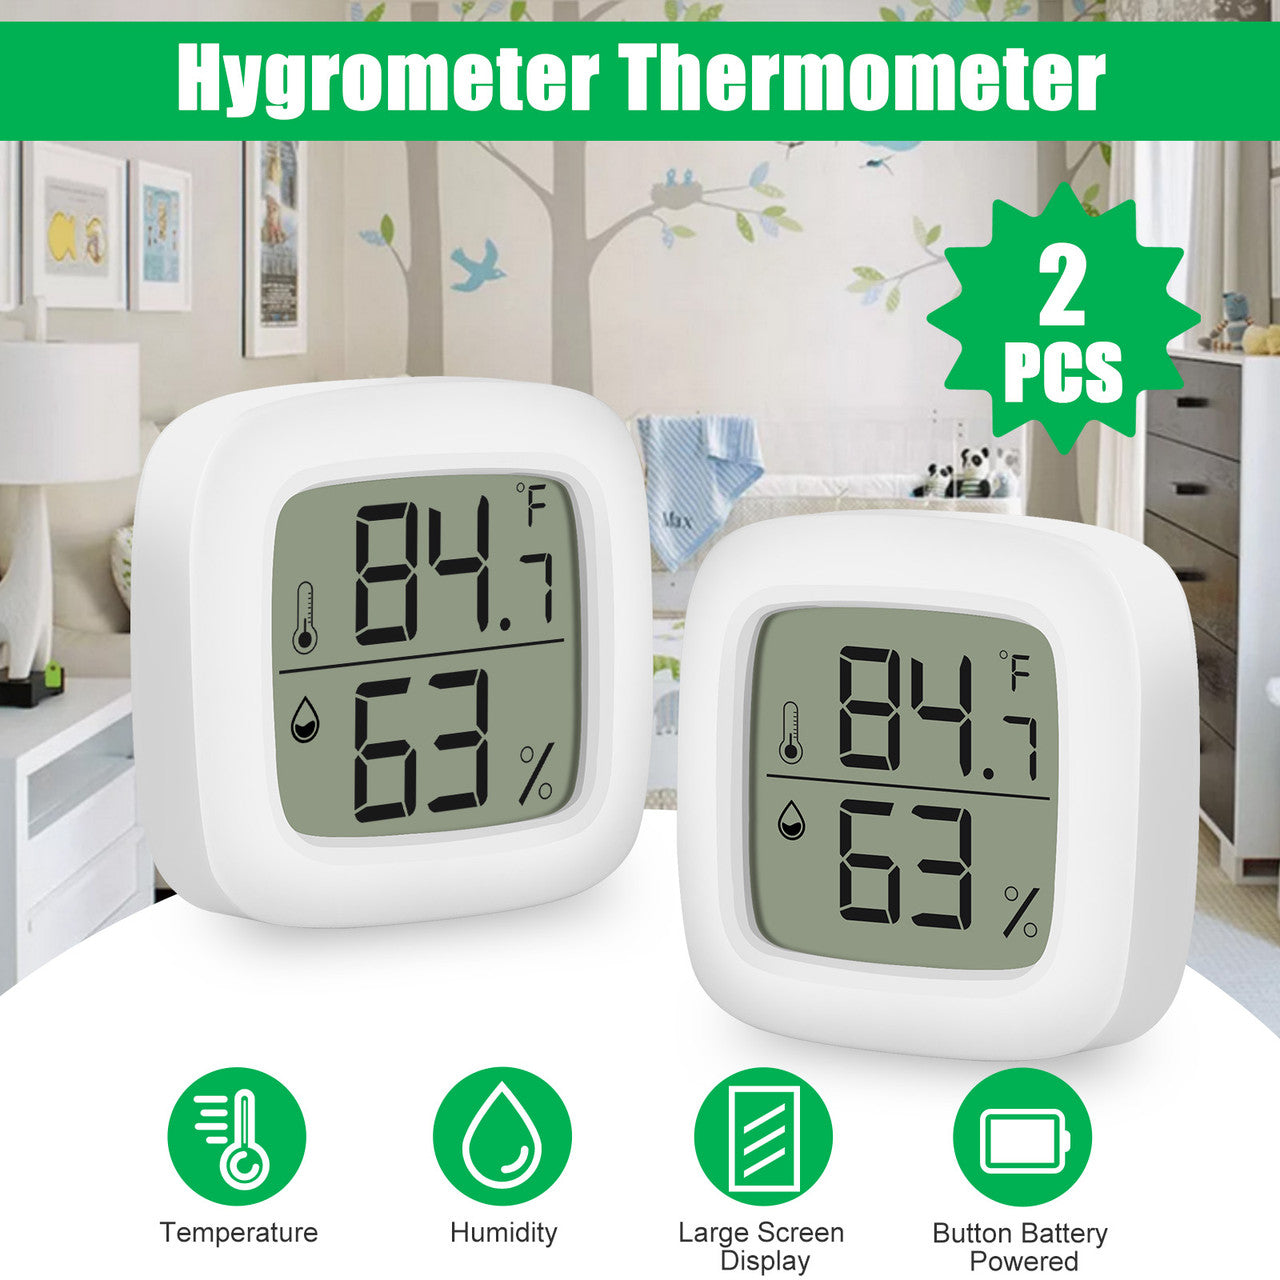 Digital Thermohygrometer with a Compact LCD Display, Lightweight and Compact, 2Pack